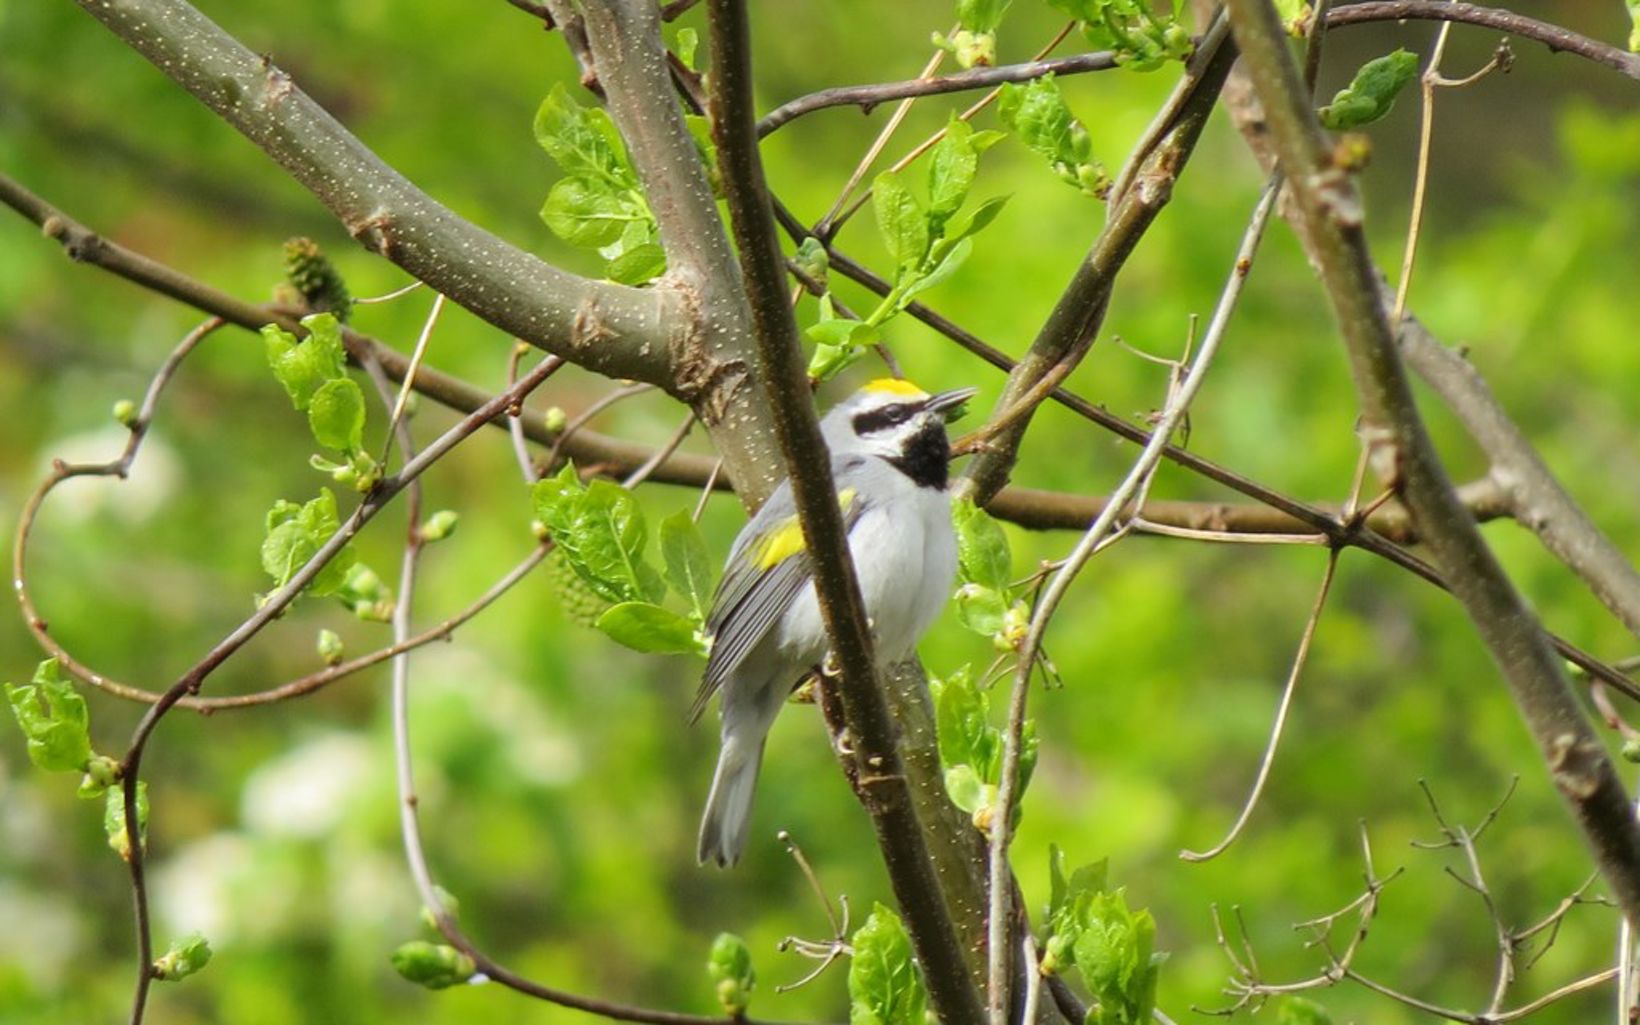 A gray and white bird with a golden cap and yellow flecks on its wings sits perched on a tree branch.